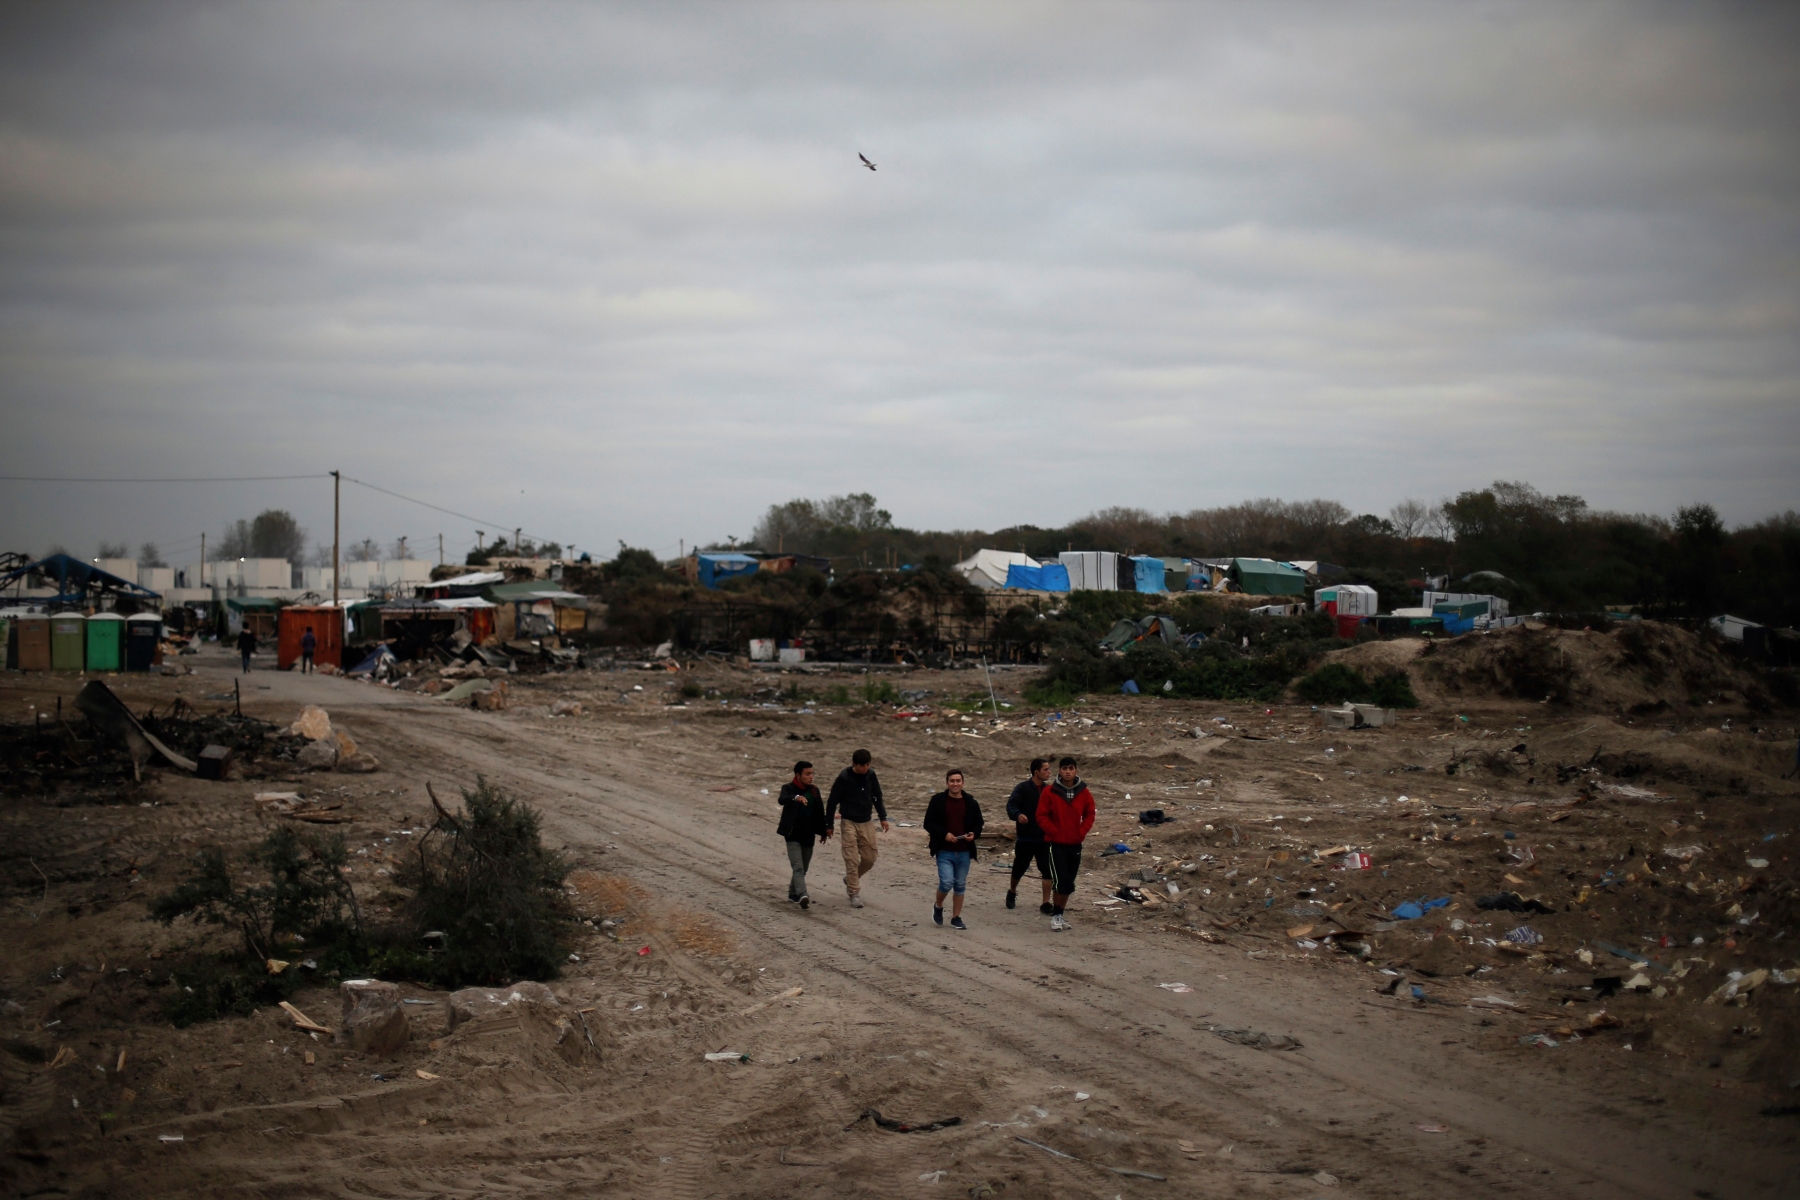 Migrants walk in the makeshift migrant camp known as "the jungle", near Calais, northern France, Friday, Oct. 28, 2016. Thousands of migrants dispersed this week from the now-torched camp they had called home in Calais, and are now struggling to adapt to unfamiliar surroundings in various towns and villages throughout France. (AP Photo/Thibault Camus) France Migrants